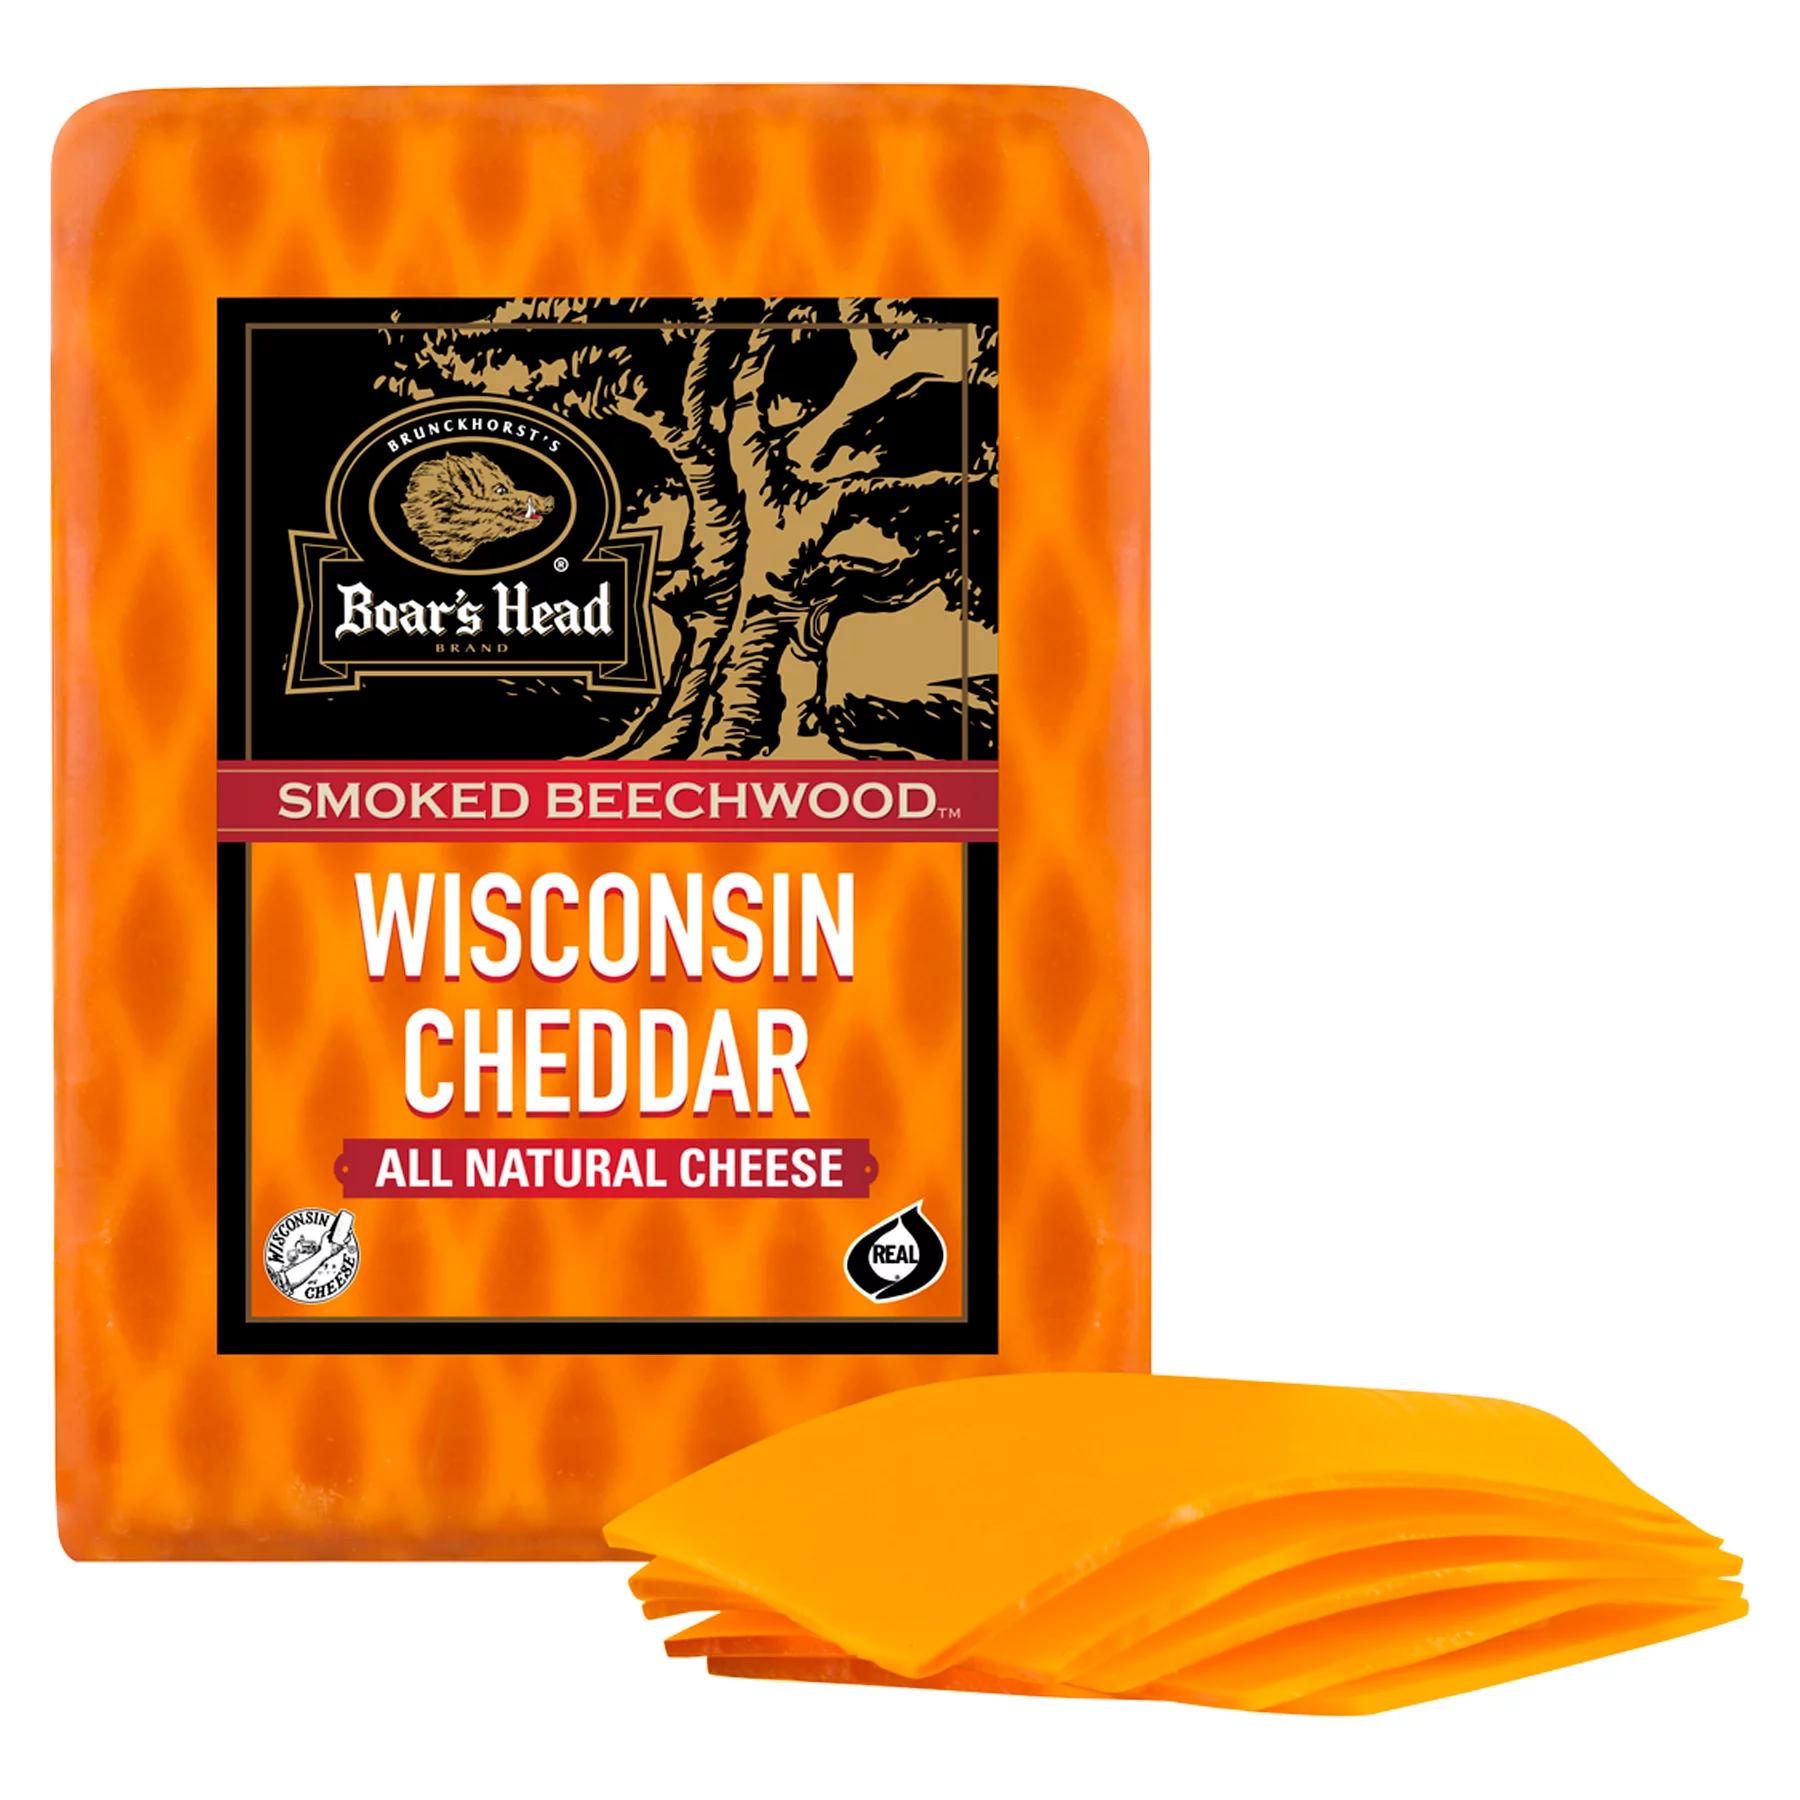 beechwood smoked cheese - Can you eat the rind on beechwood smoked cheese